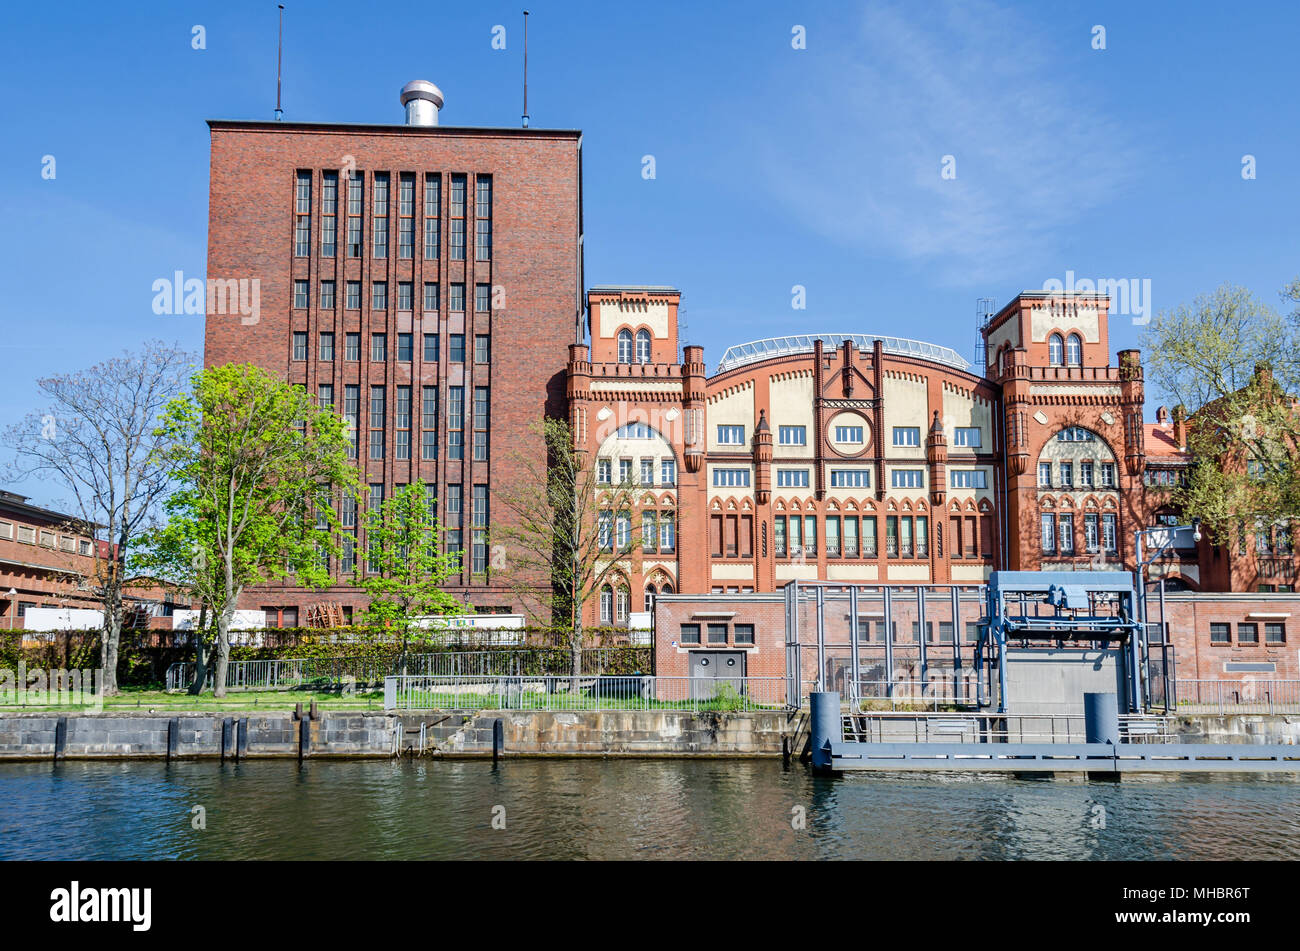 Berlin, Germany - April 22, 2018: Brick Gothic historic machine hall of the cogeneration plant Charlottenburg as seen from the river Spree Stock Photo